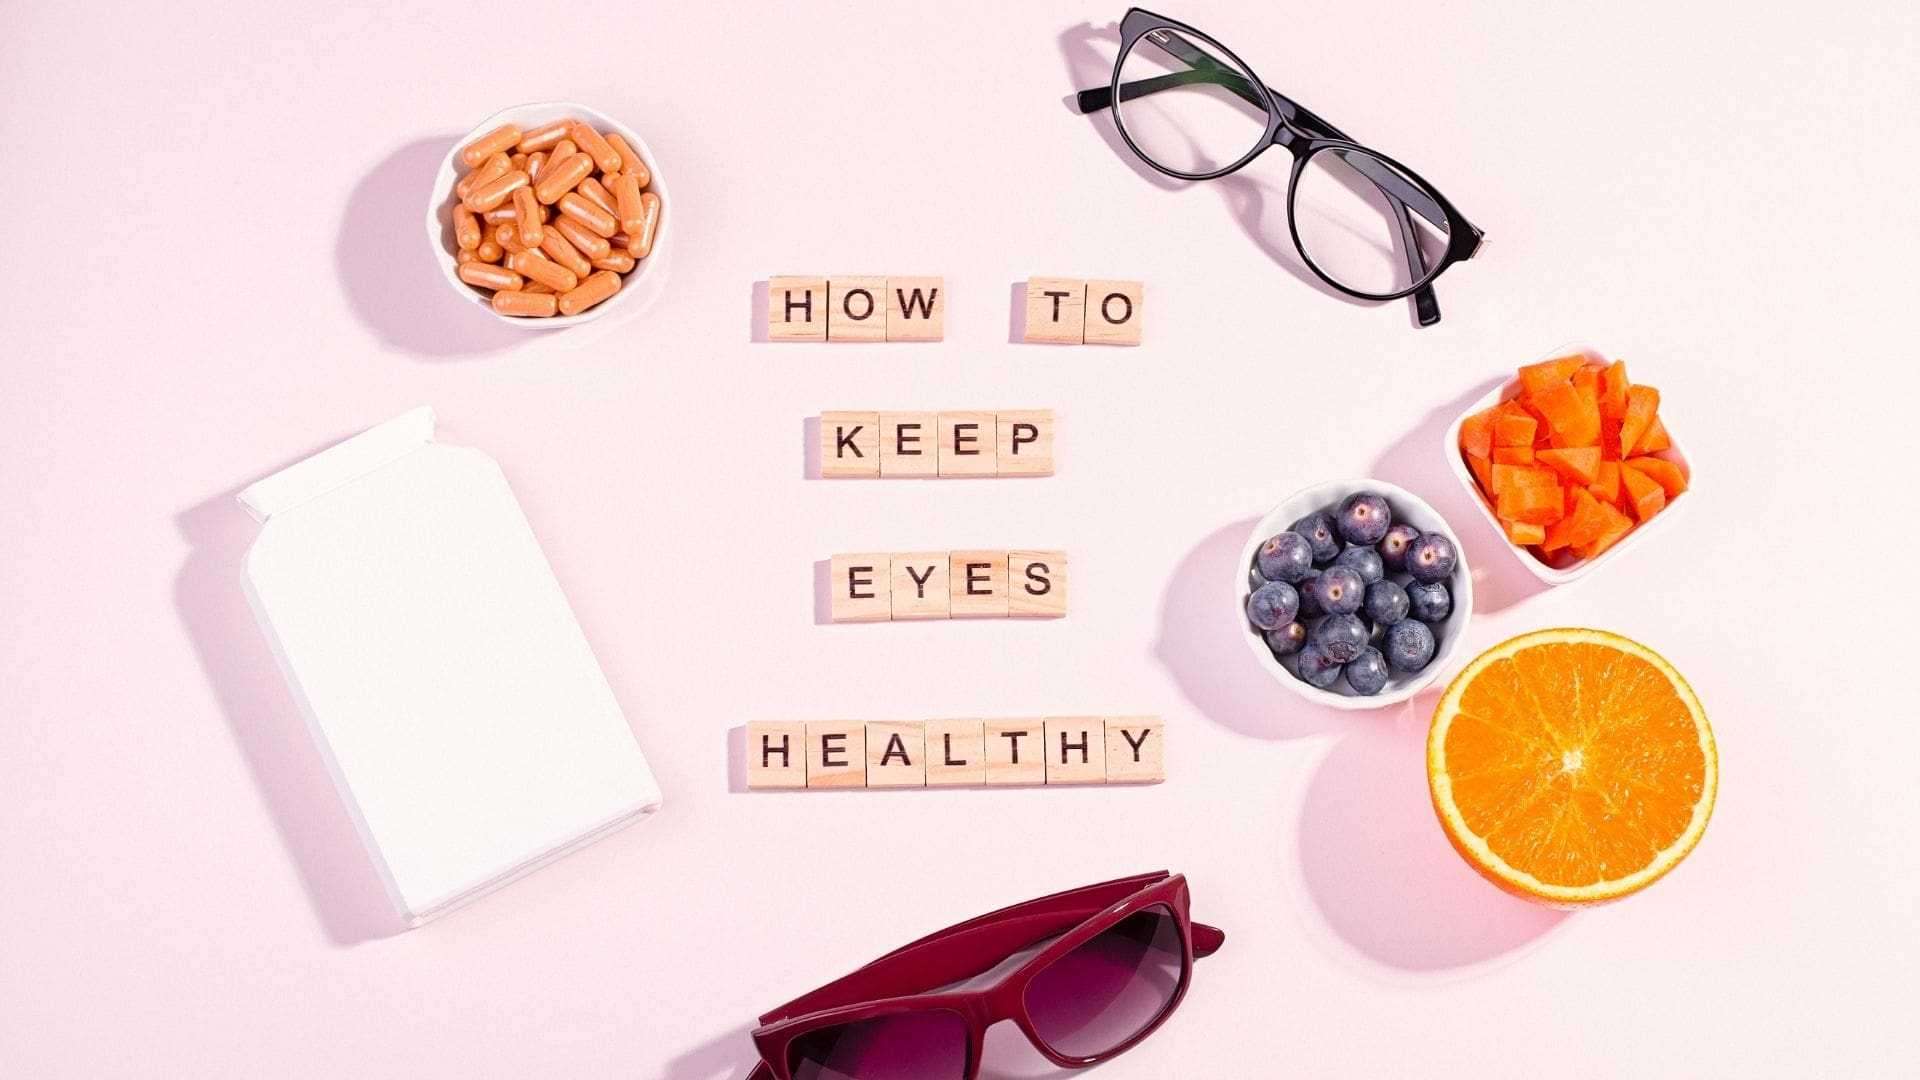 Here are Tips for Maintaining Eye Health for Millennials